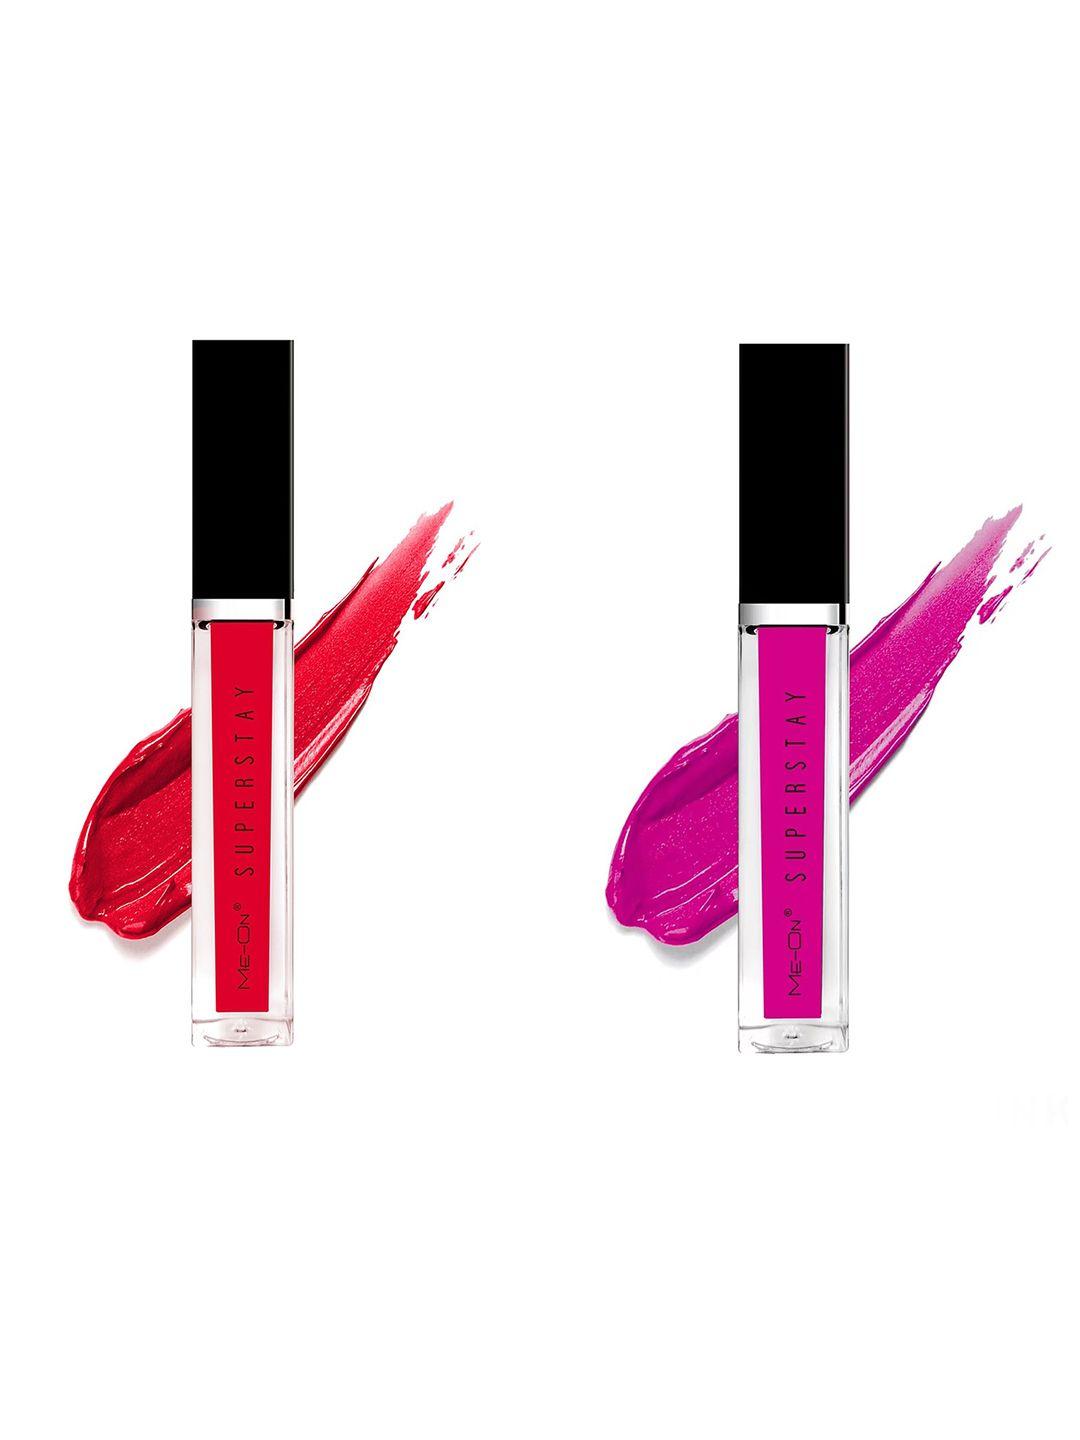 me-on set of 2 super stay lip gloss - seductive red 03 & passionate pink 10